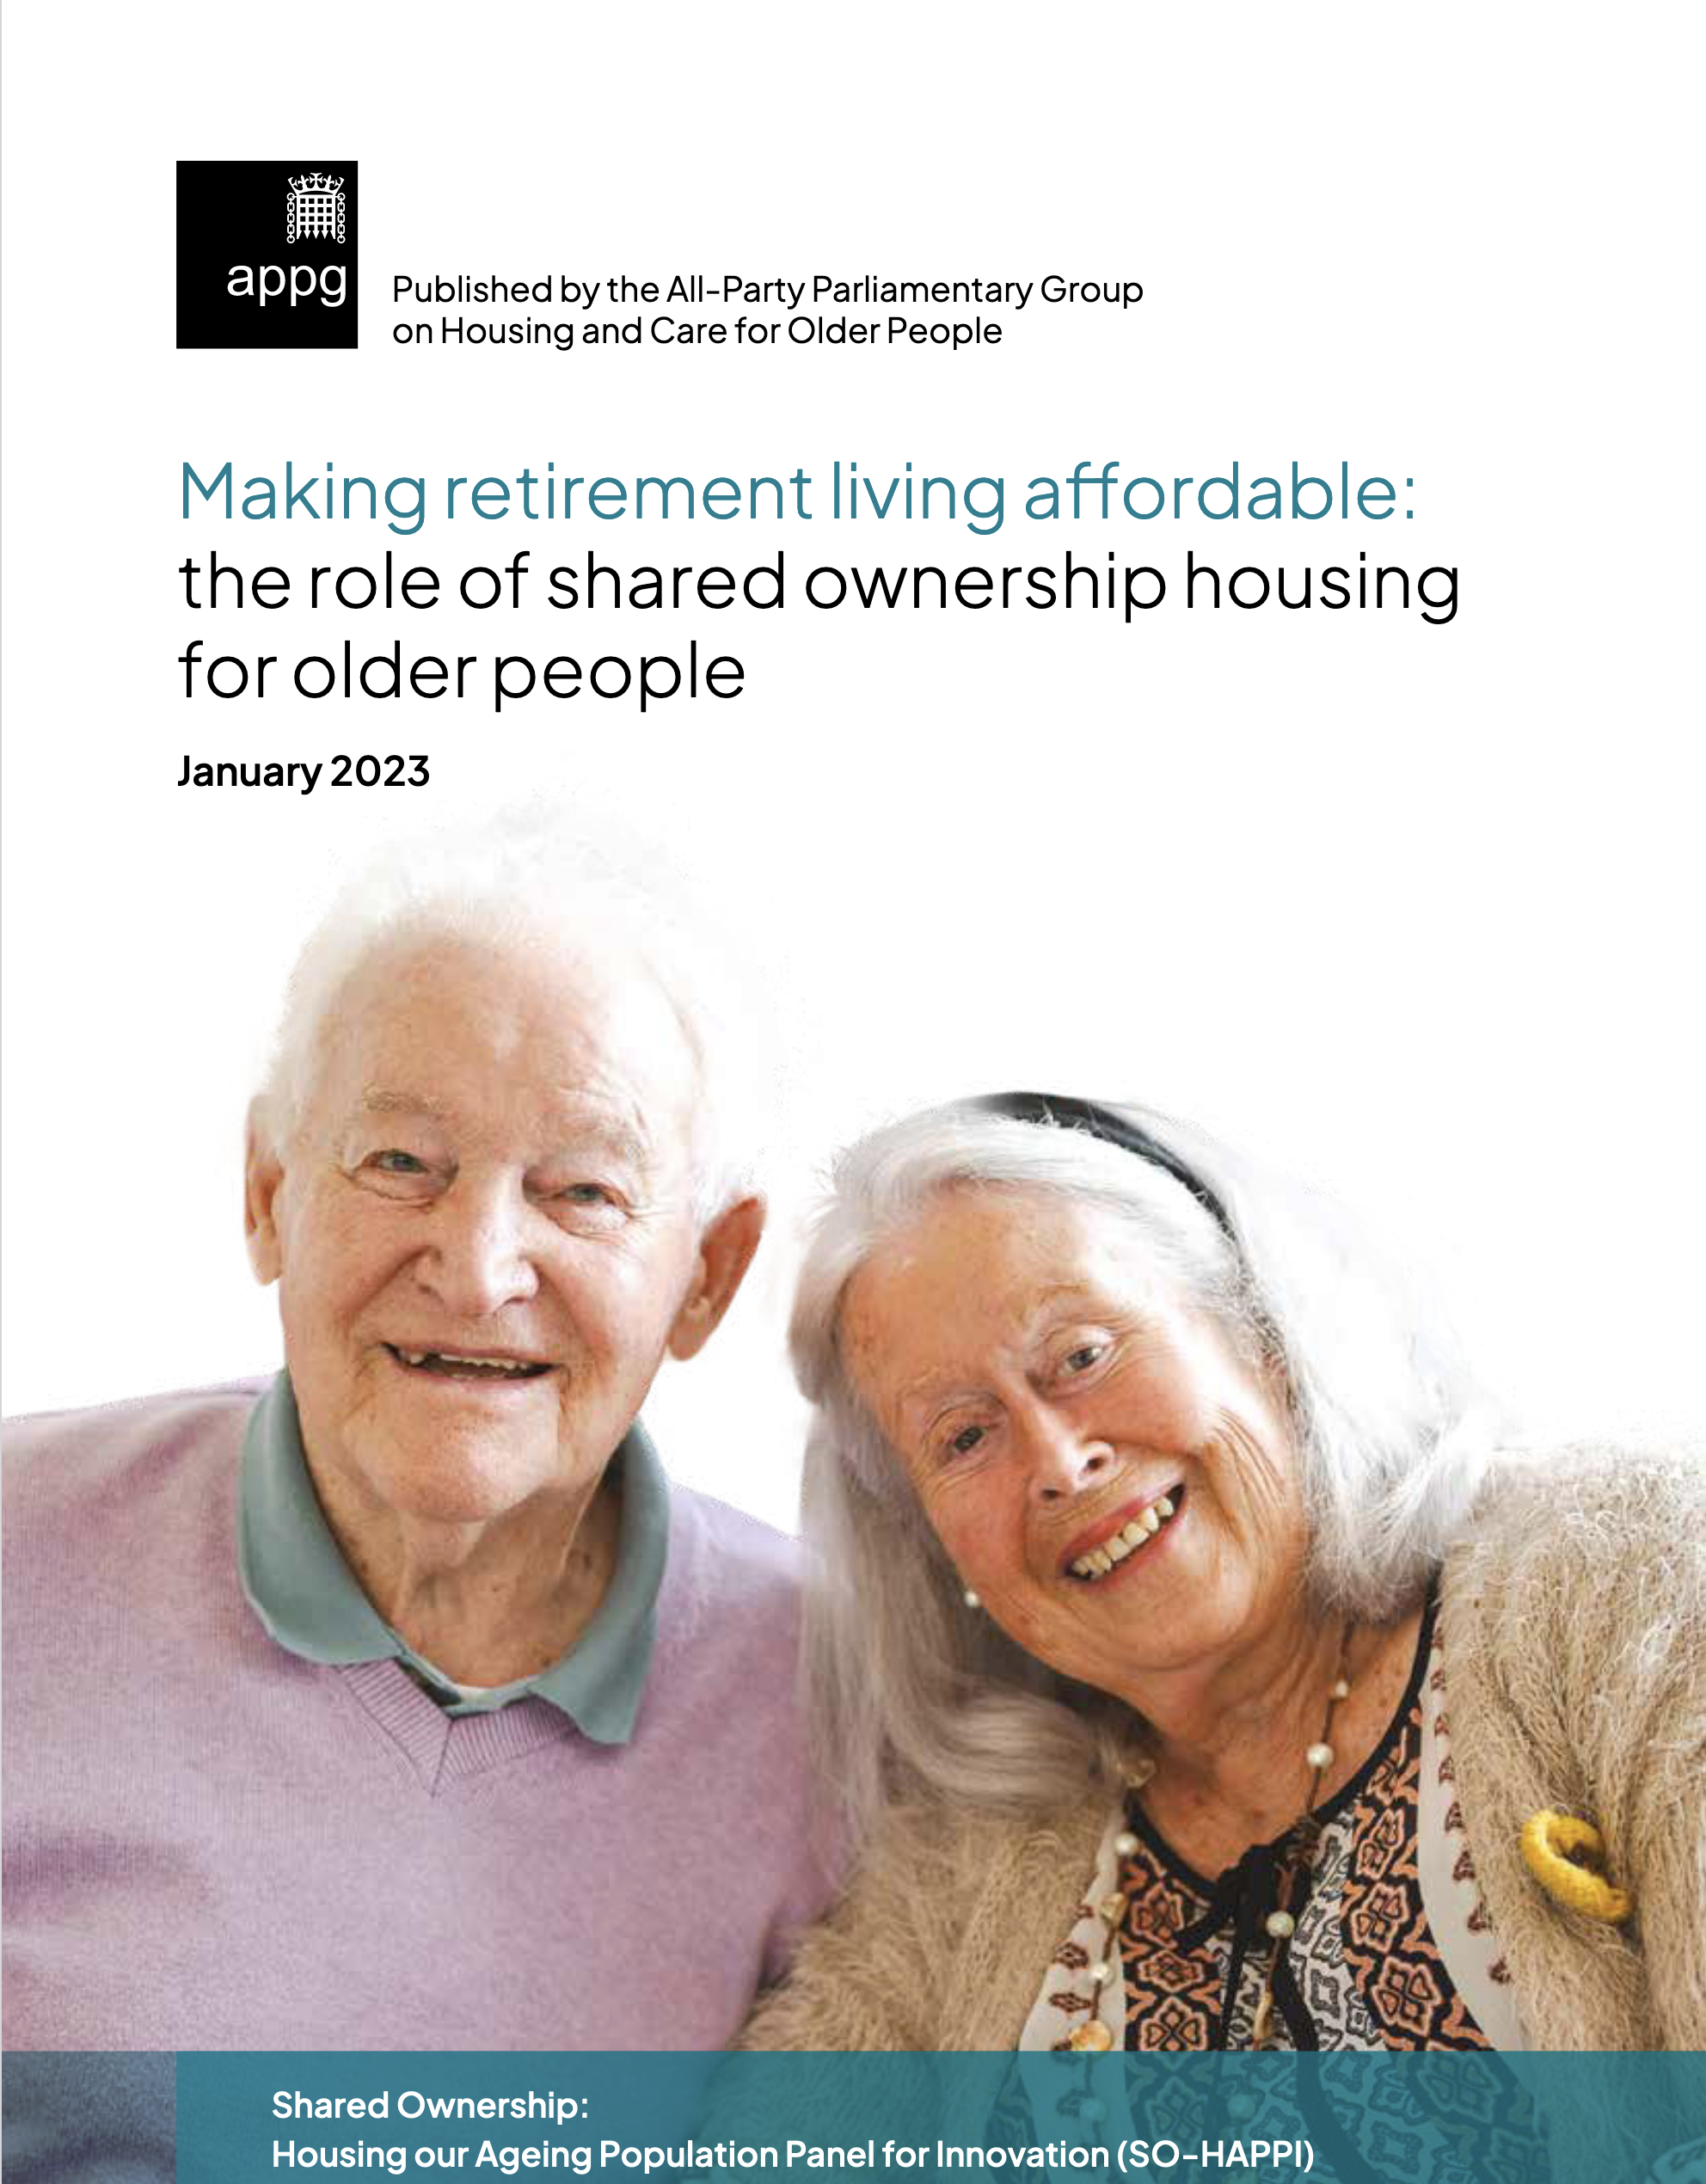 Parliamentary report calls for reforms to help older people “rightsize” their homes